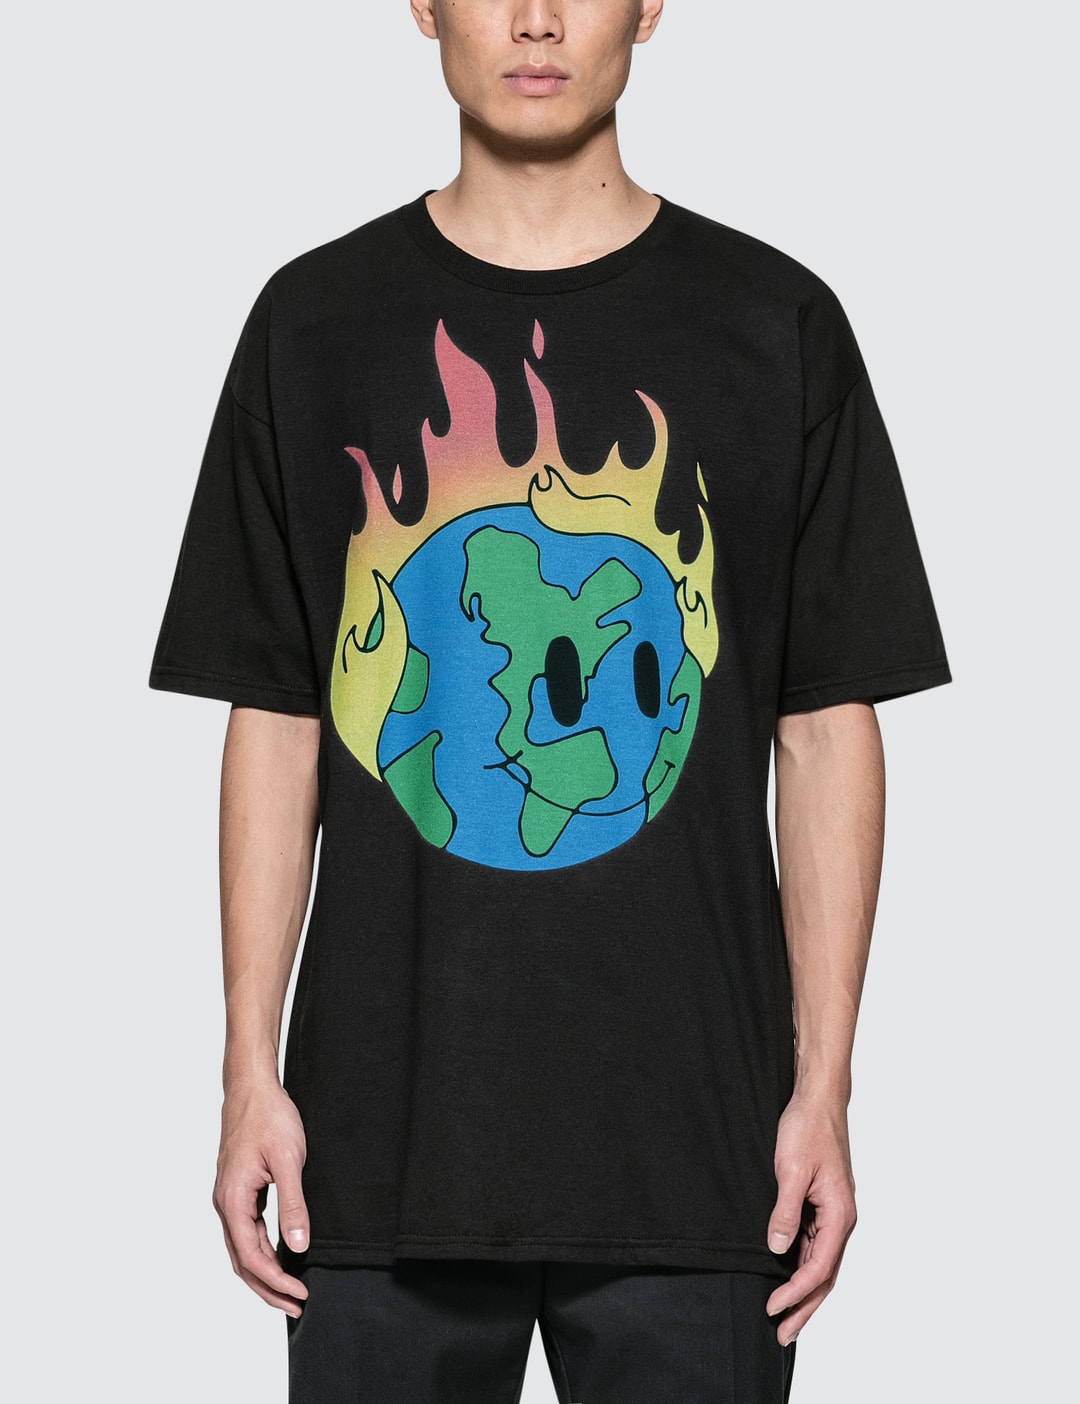 Chinatown Market - End Of The World T-Shirt | HBX - Globally Curated ...